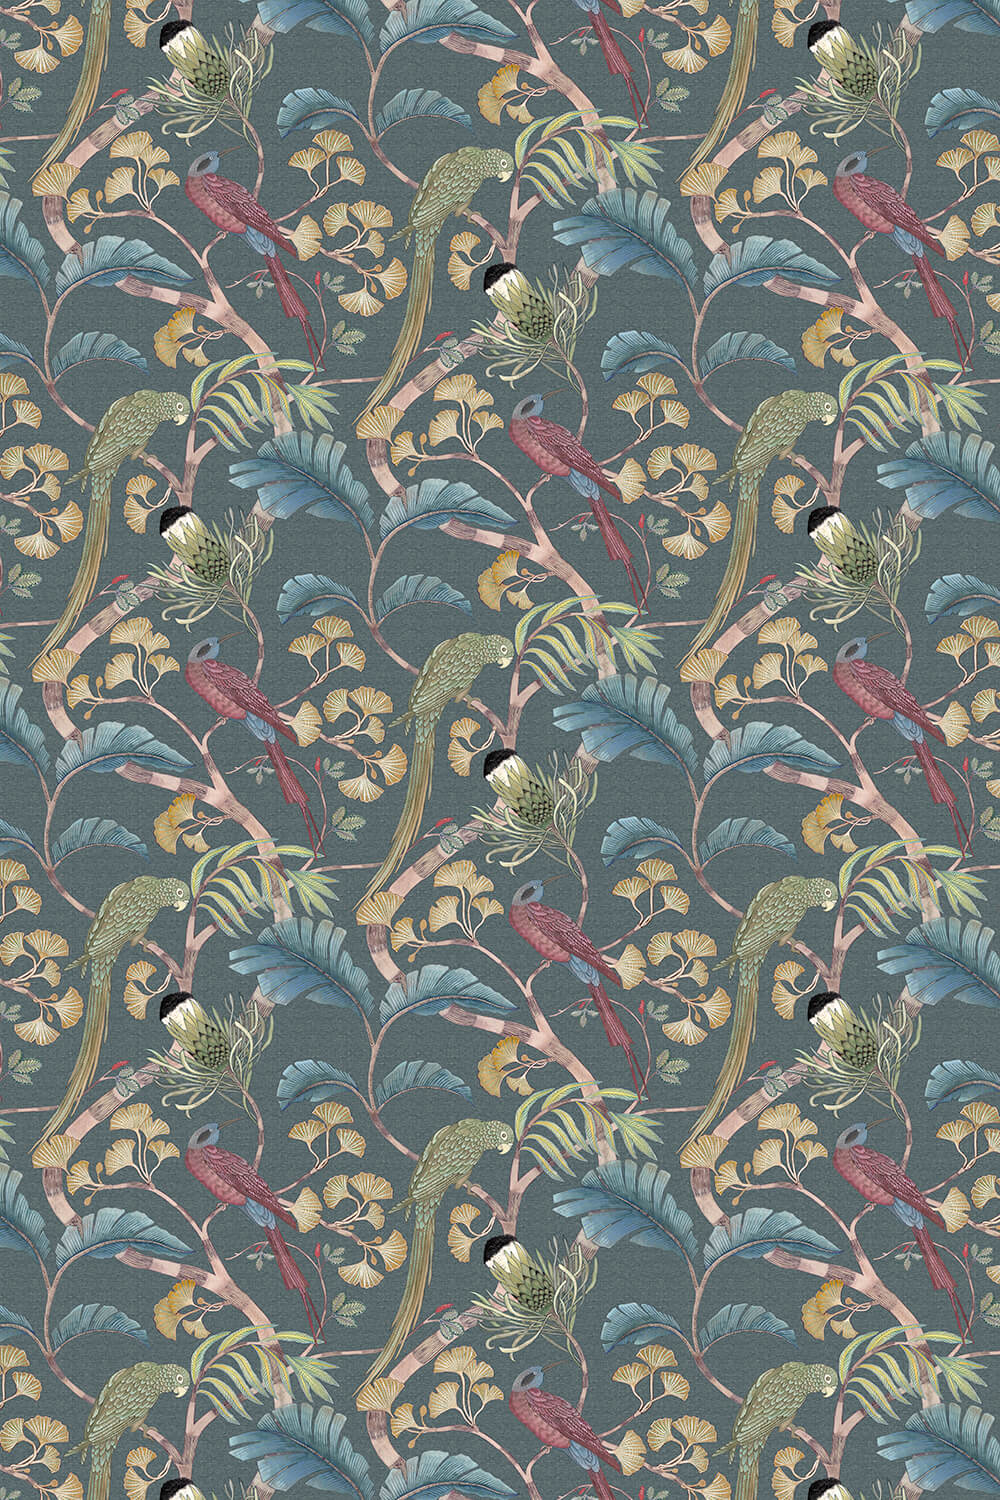 JMF-200602-PLN | Living Branches Fabric | Dark Teal, Yellow and Olive | Flat Shot